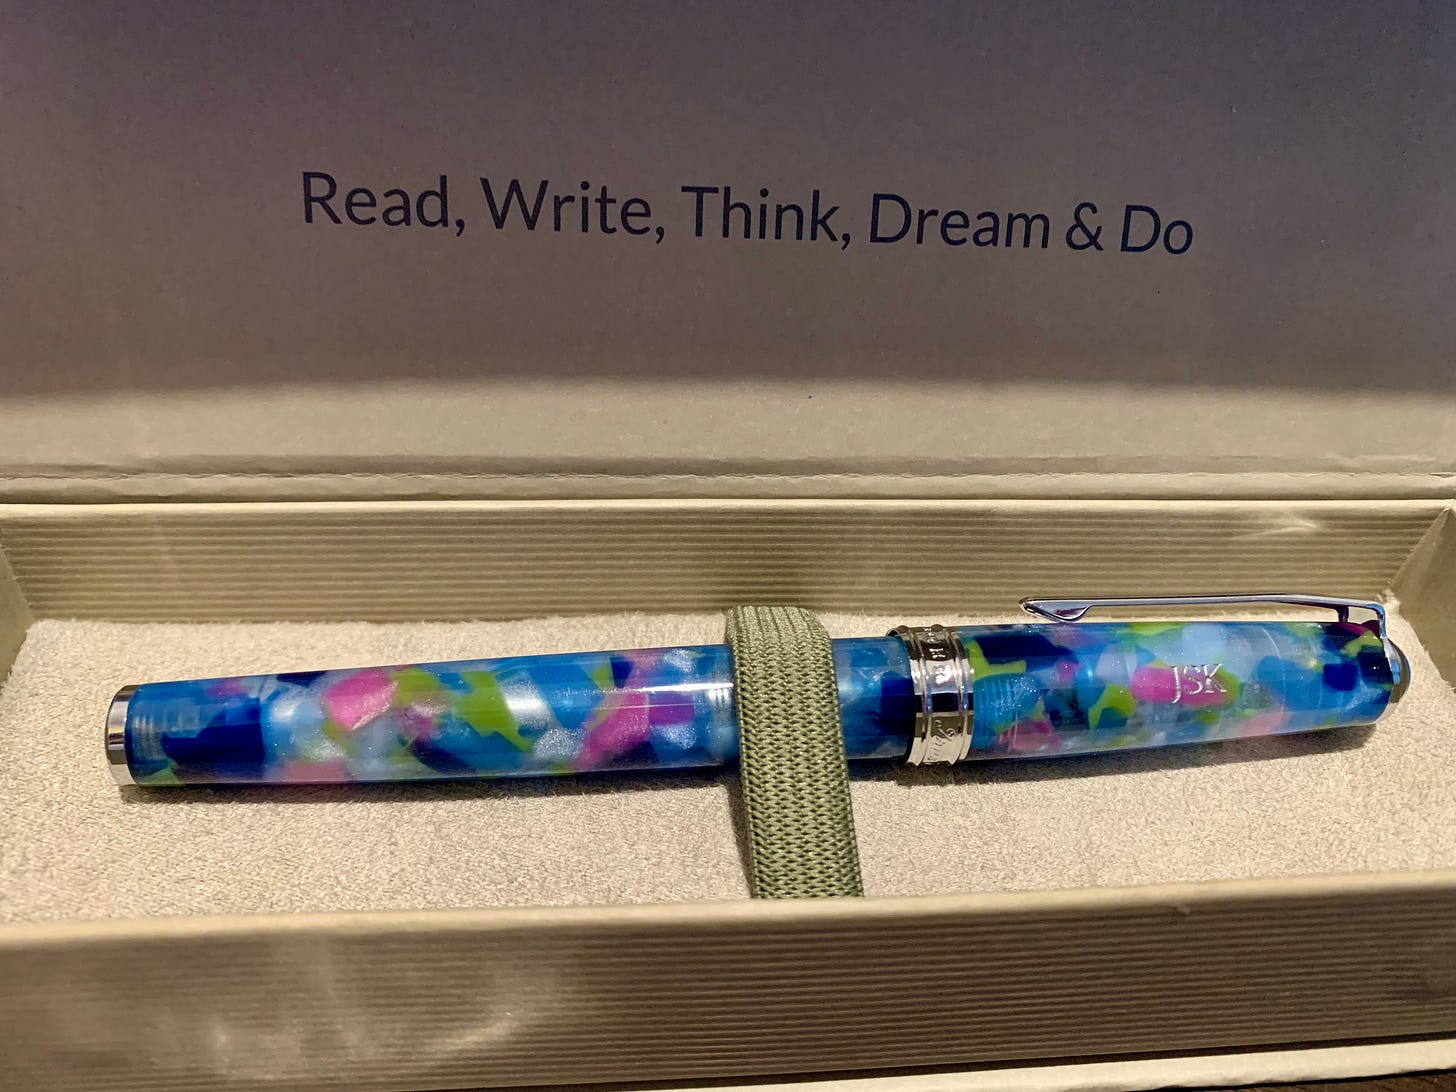 A mottled blue, green, pink, and white pen in a beige case whose inner lid reads "Read, Write, Think, Dream, and Do"